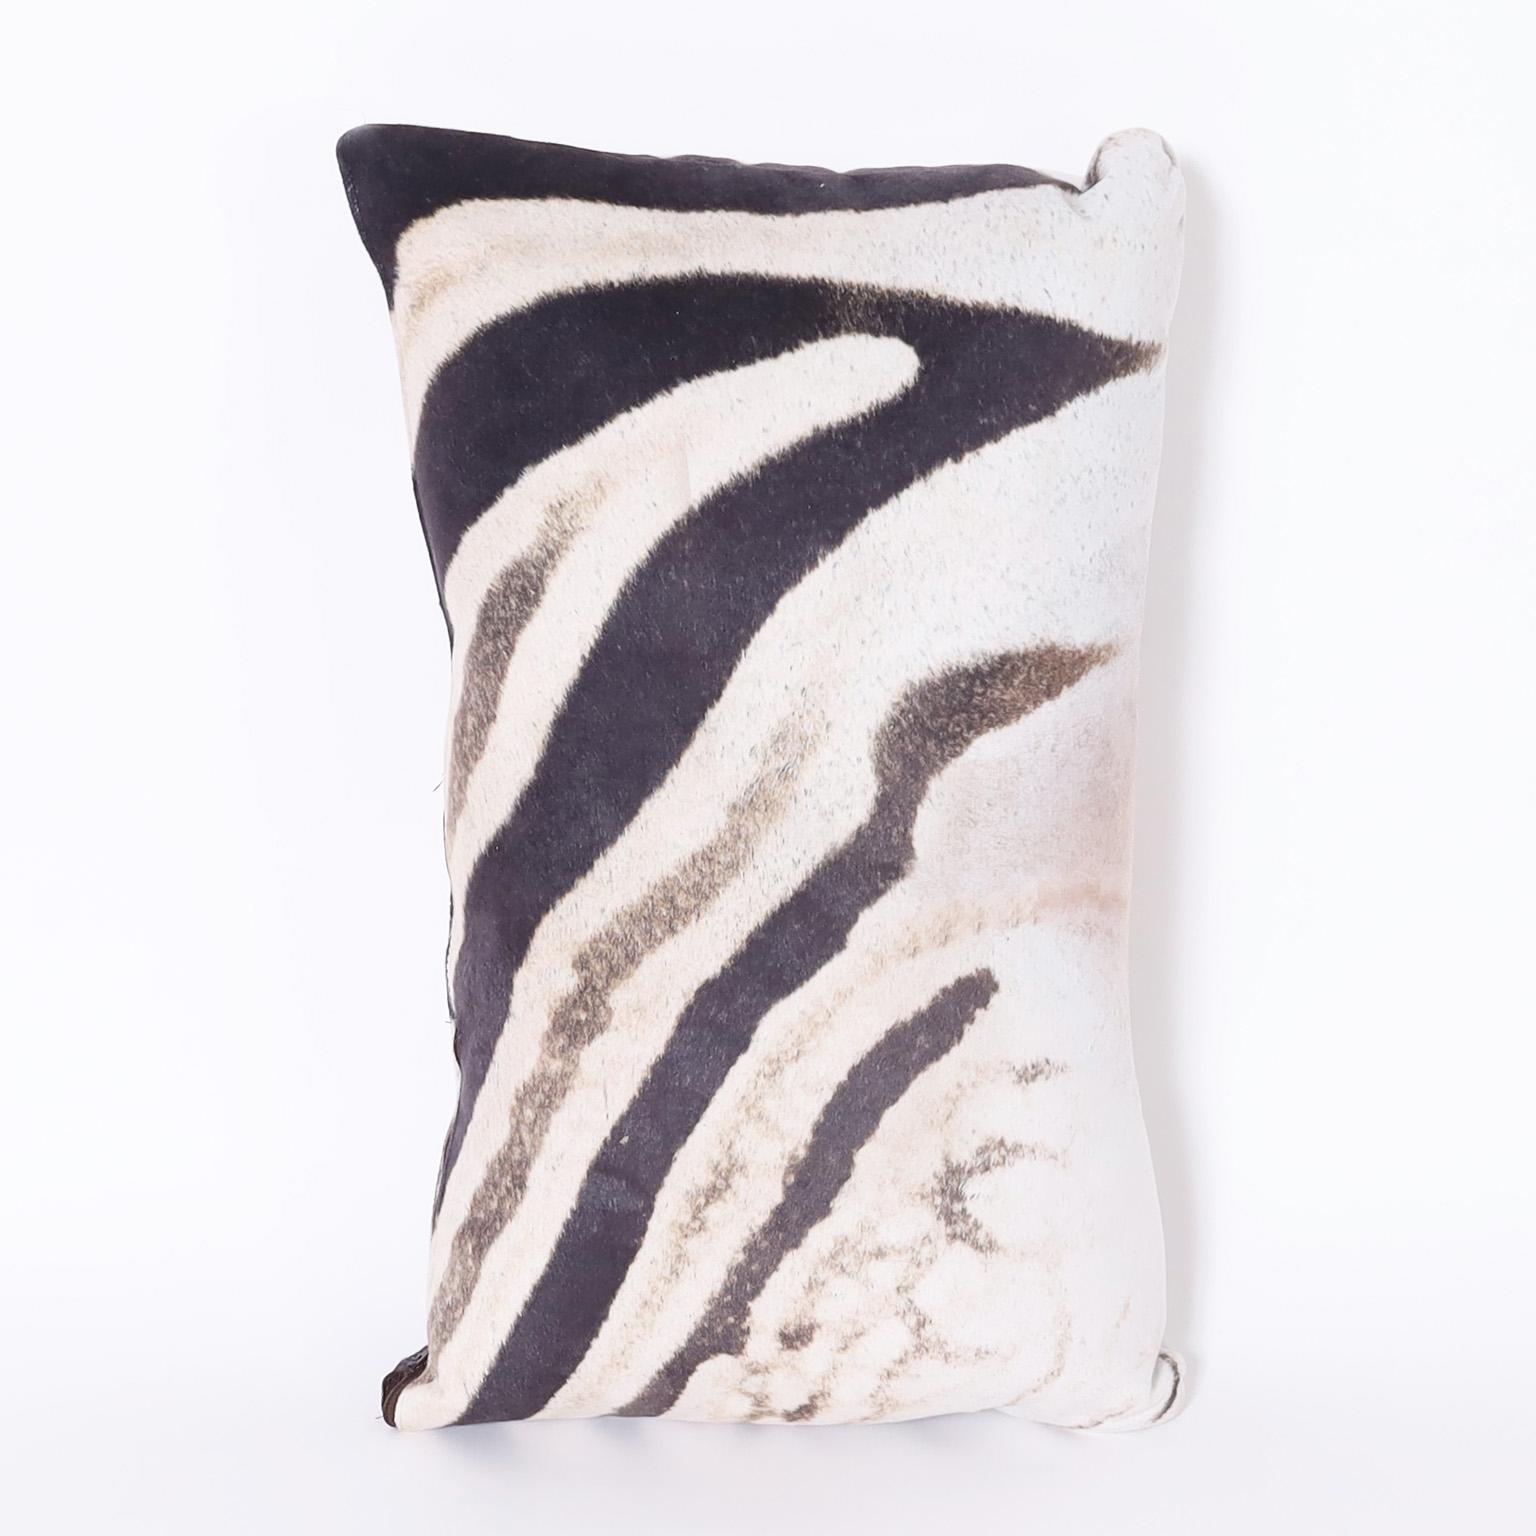 Enticing pillows crafted in cowhide with printed zebra stripes each with its own form and organic patterns. Priced Individually.

From left to right:

H: 13 W: 12 D: 5.5 SOLD

H: 22 W: 12 D: 7 $595.00.

H: 15 W: 12 D: 5.5 SOLD

H: 12 W: 12 D: 15